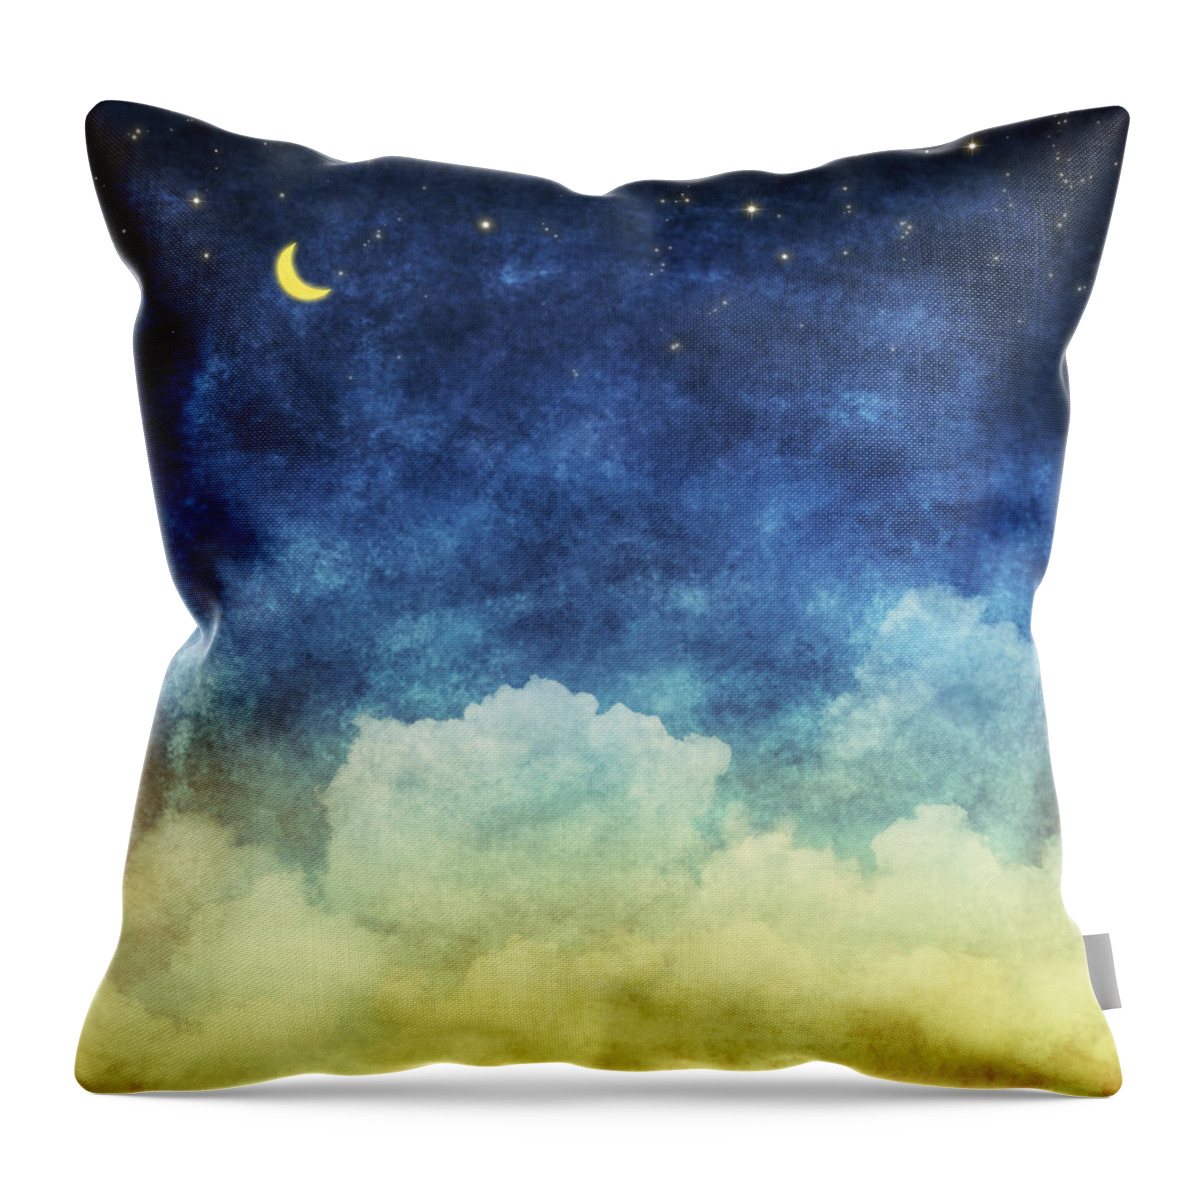 Art Throw Pillow featuring the painting Cloud And Sky At Night by Setsiri Silapasuwanchai